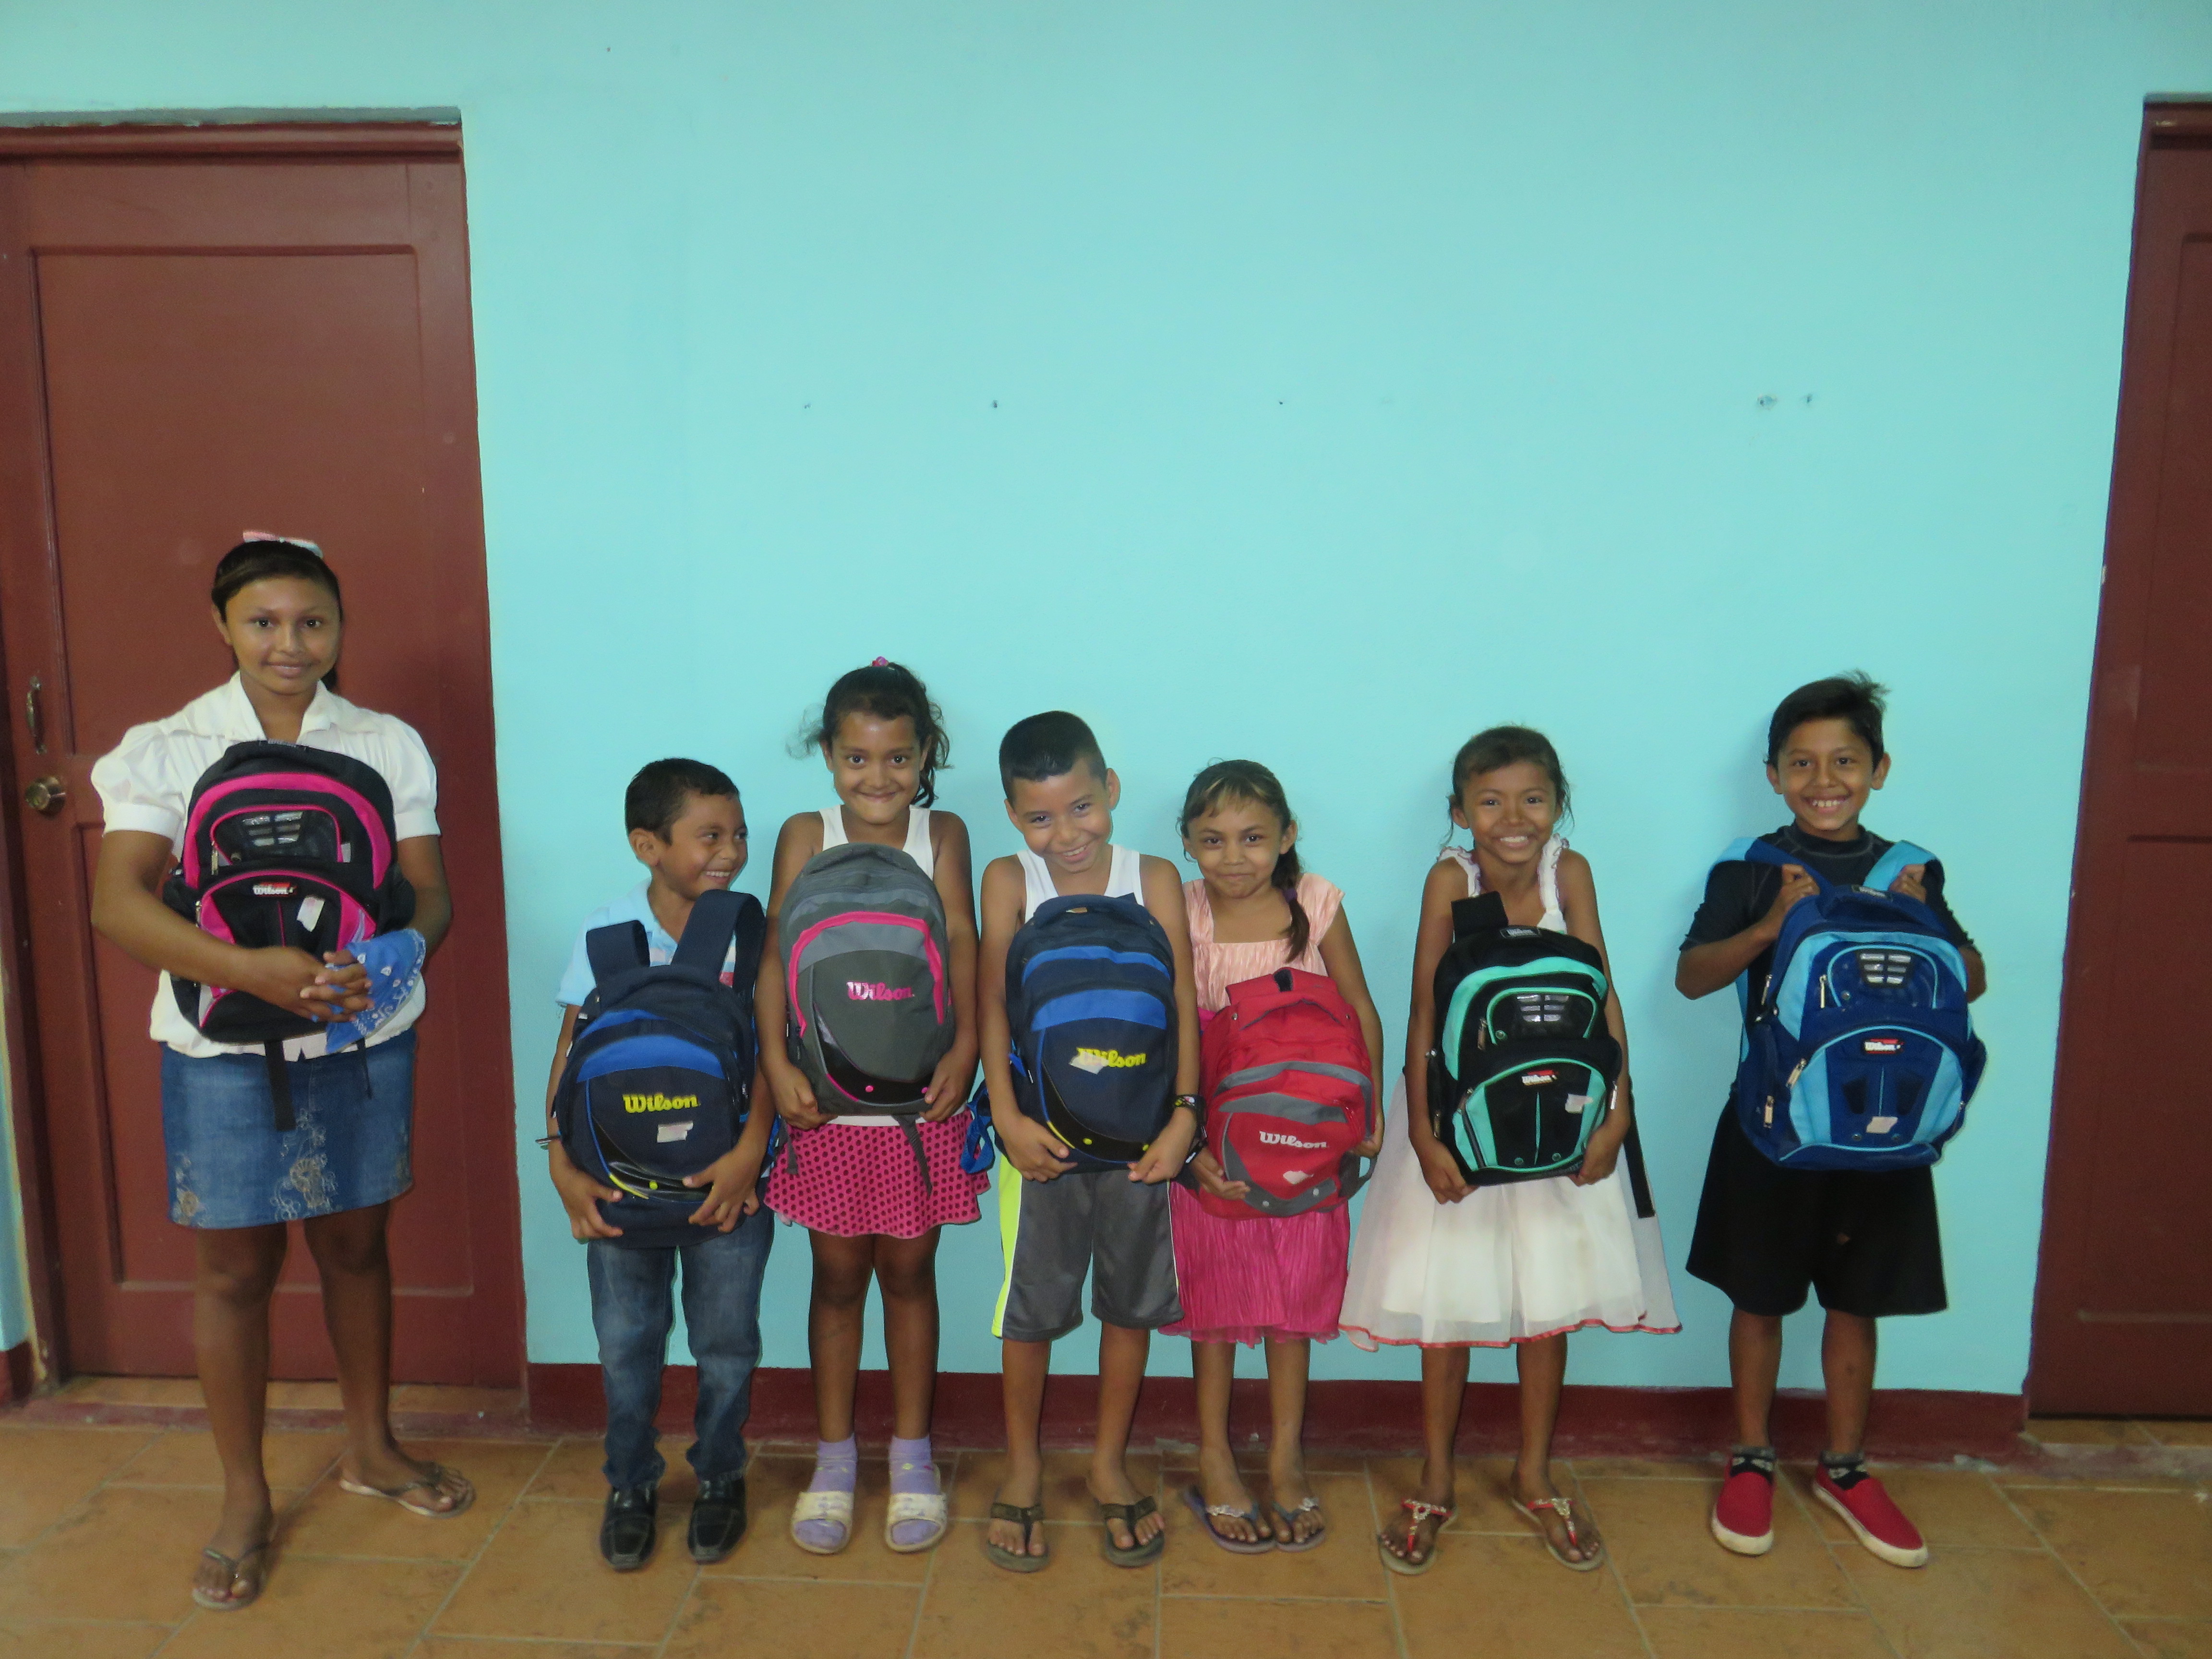 Elementary school students from Nuevo Amanecer 